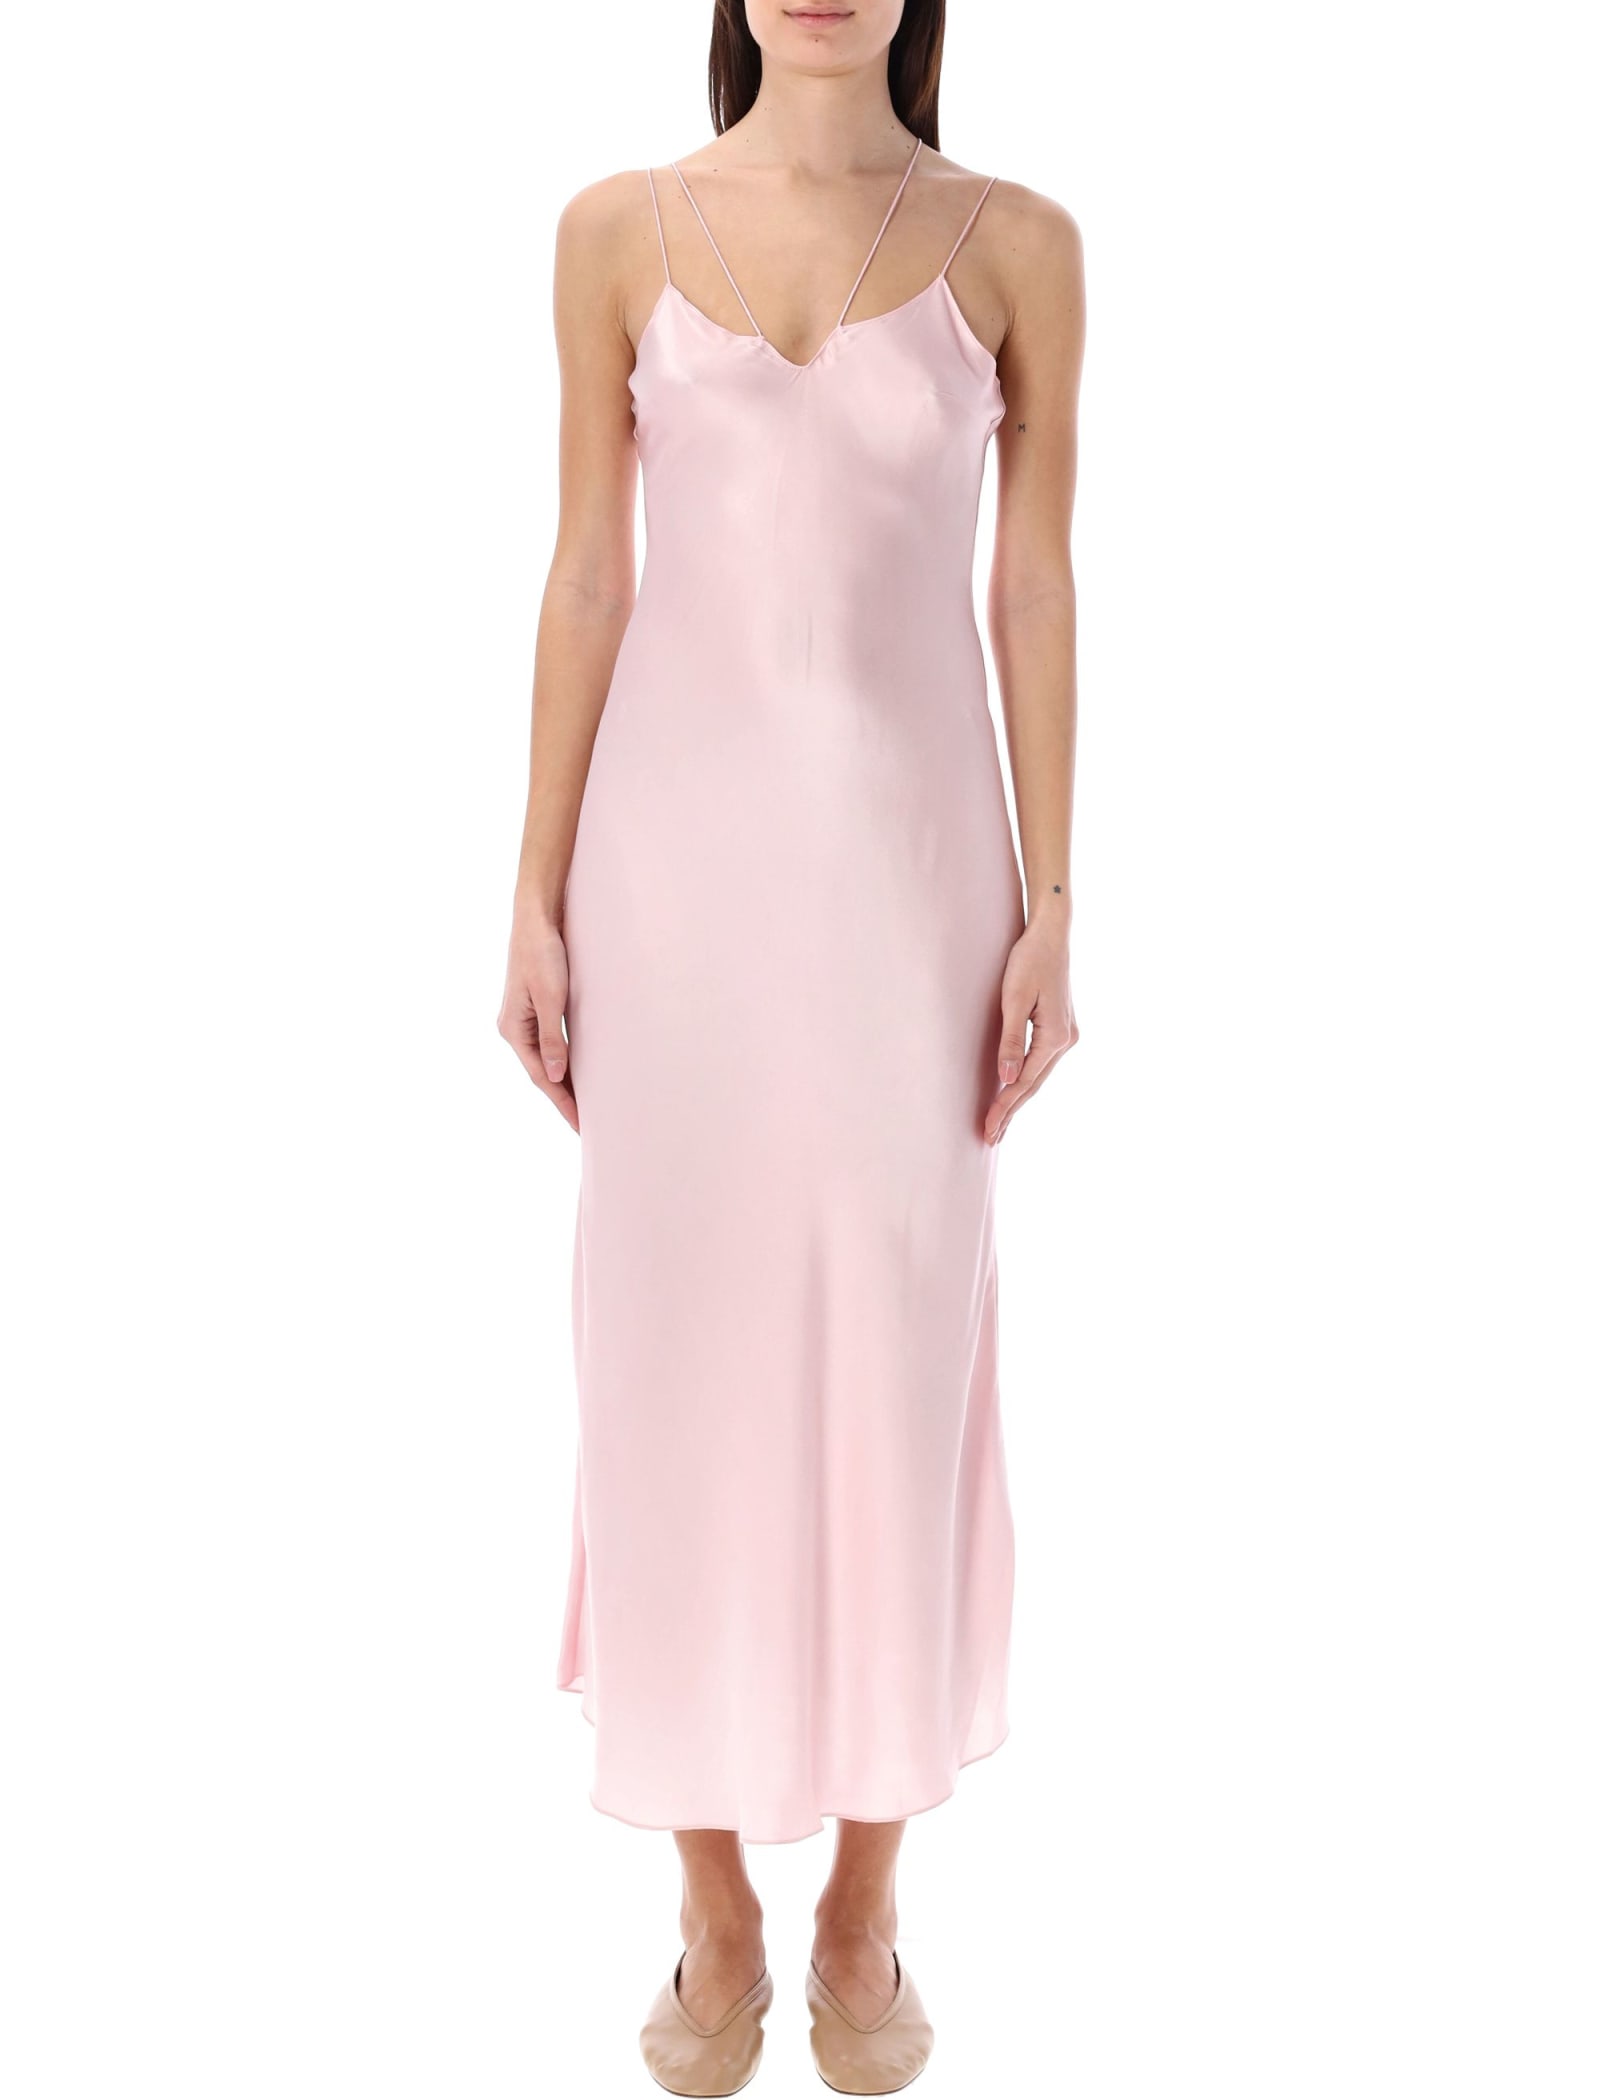 Shop The Garment Catania Long Slip Dress In Baby Pink